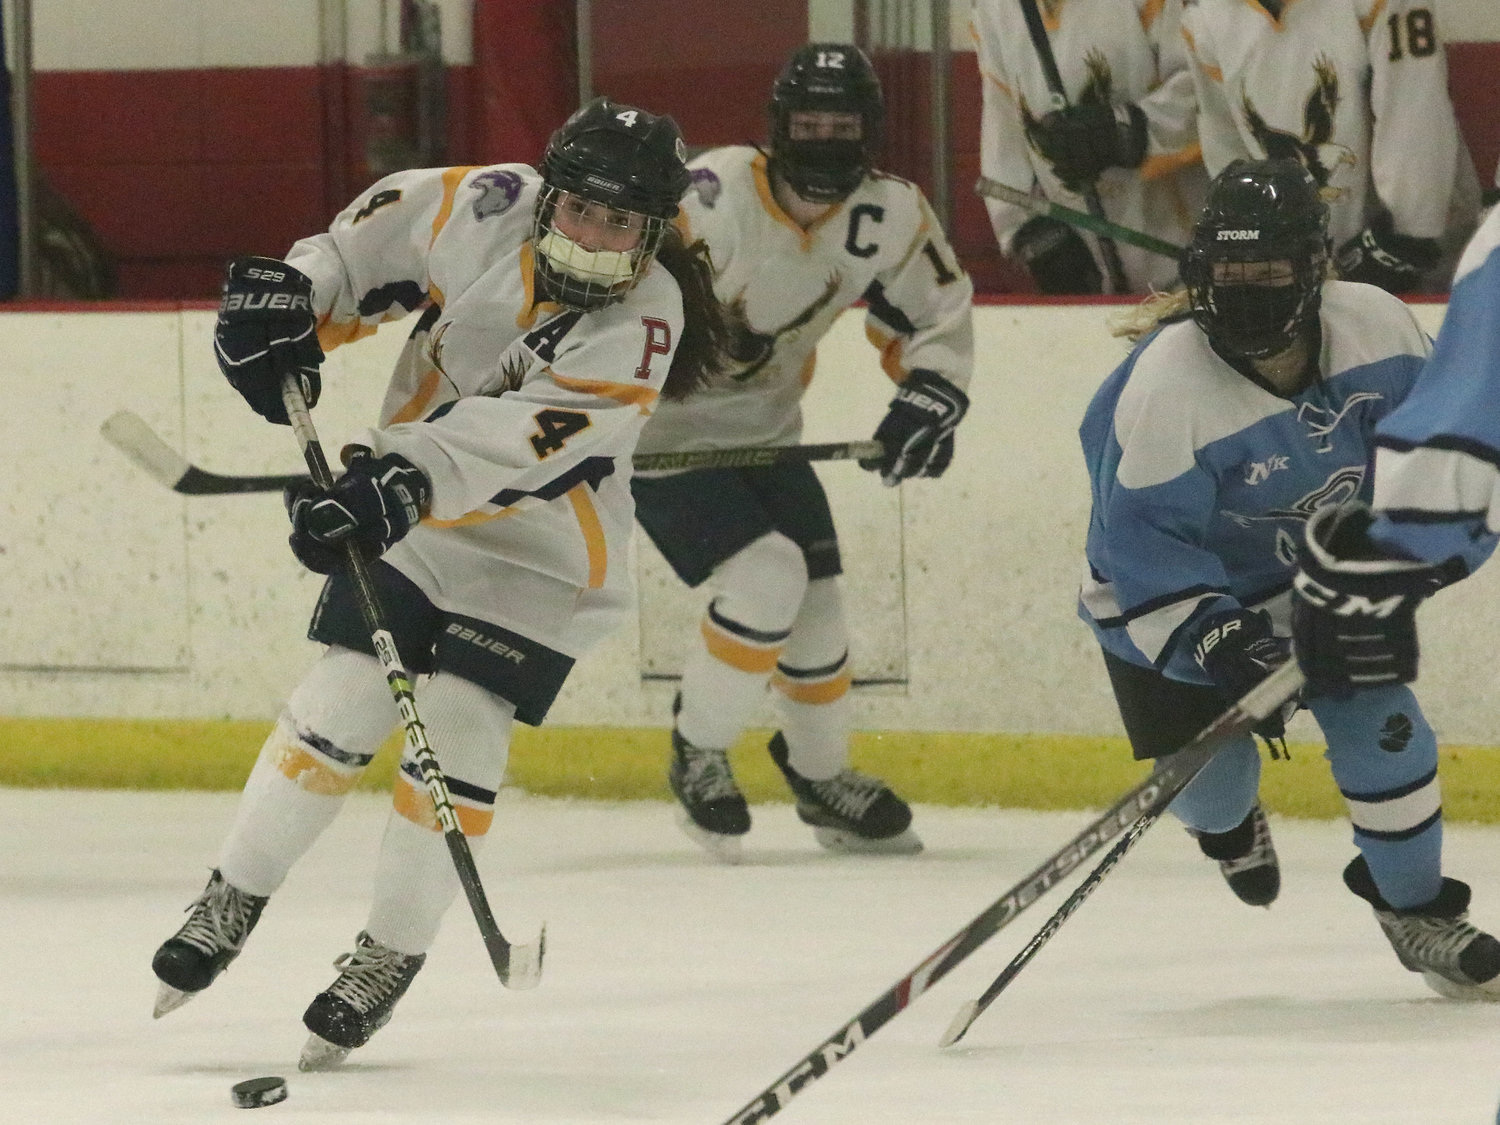 Marissa Levreault makes a pass to line mate Kat Barker who went on to score in the second period in Game 2.